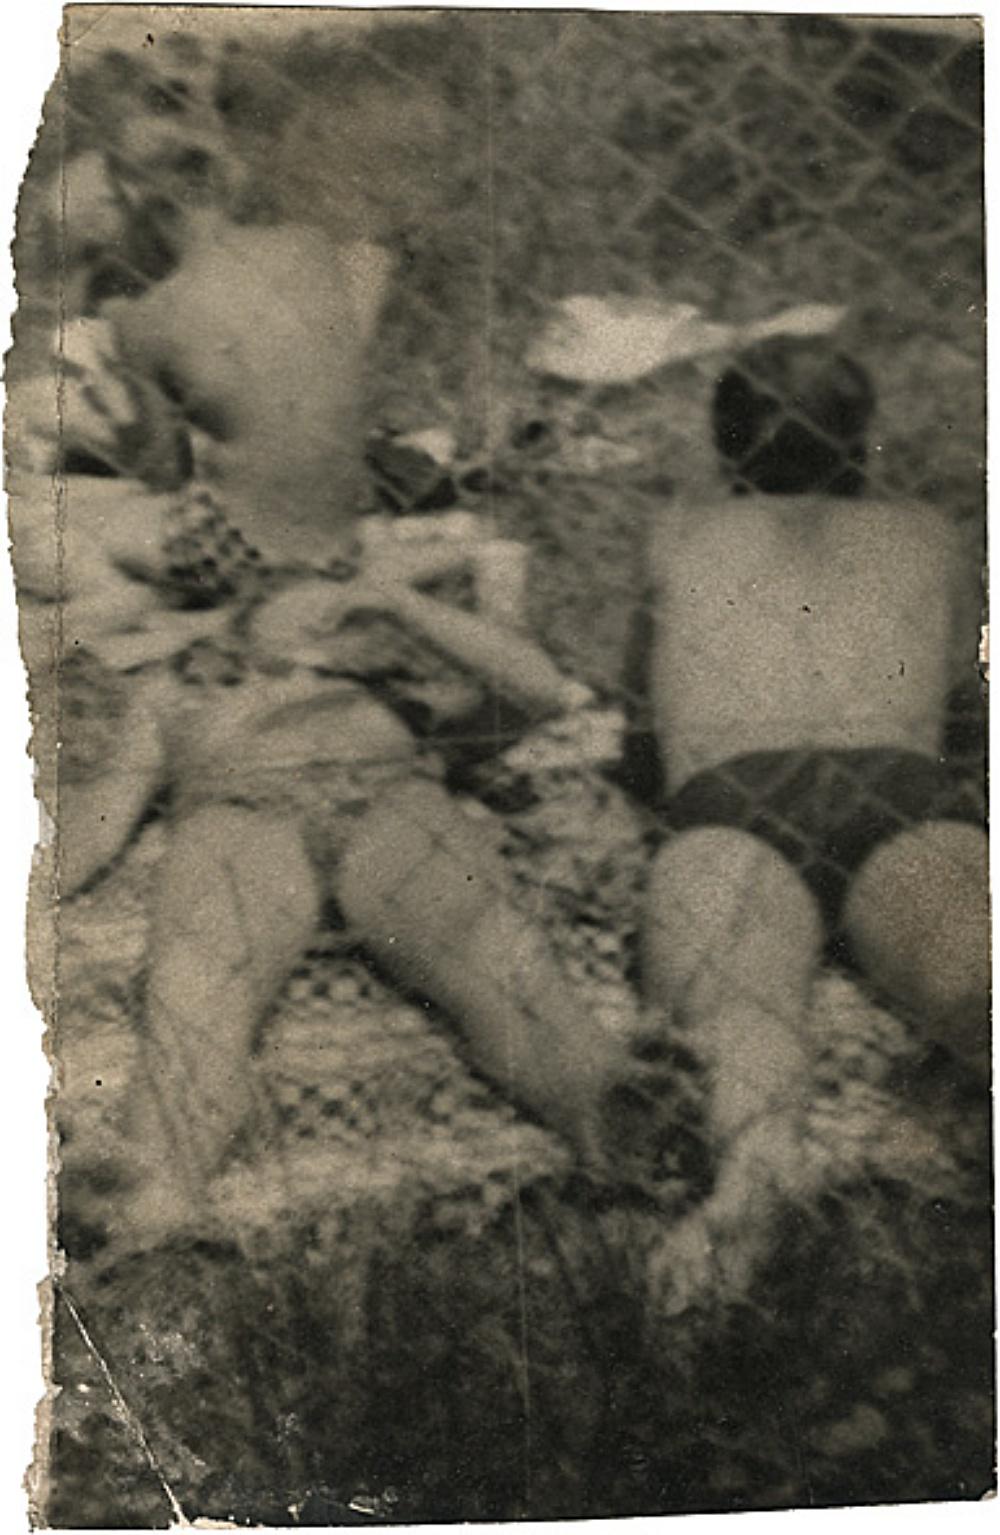 Miroslav Tichý (*1926, Czech Republic) 
Untitled, MT Inv. No 3-8-431 
Unknown, ca. 1970-1990
Silver Gelatin Print 
Sheet 15 x 9,8 cm (5 7/8 x 3 7/8 in.)
Unique
Print only

Tichý, practically reinventing photography from scratch, reconstitutes